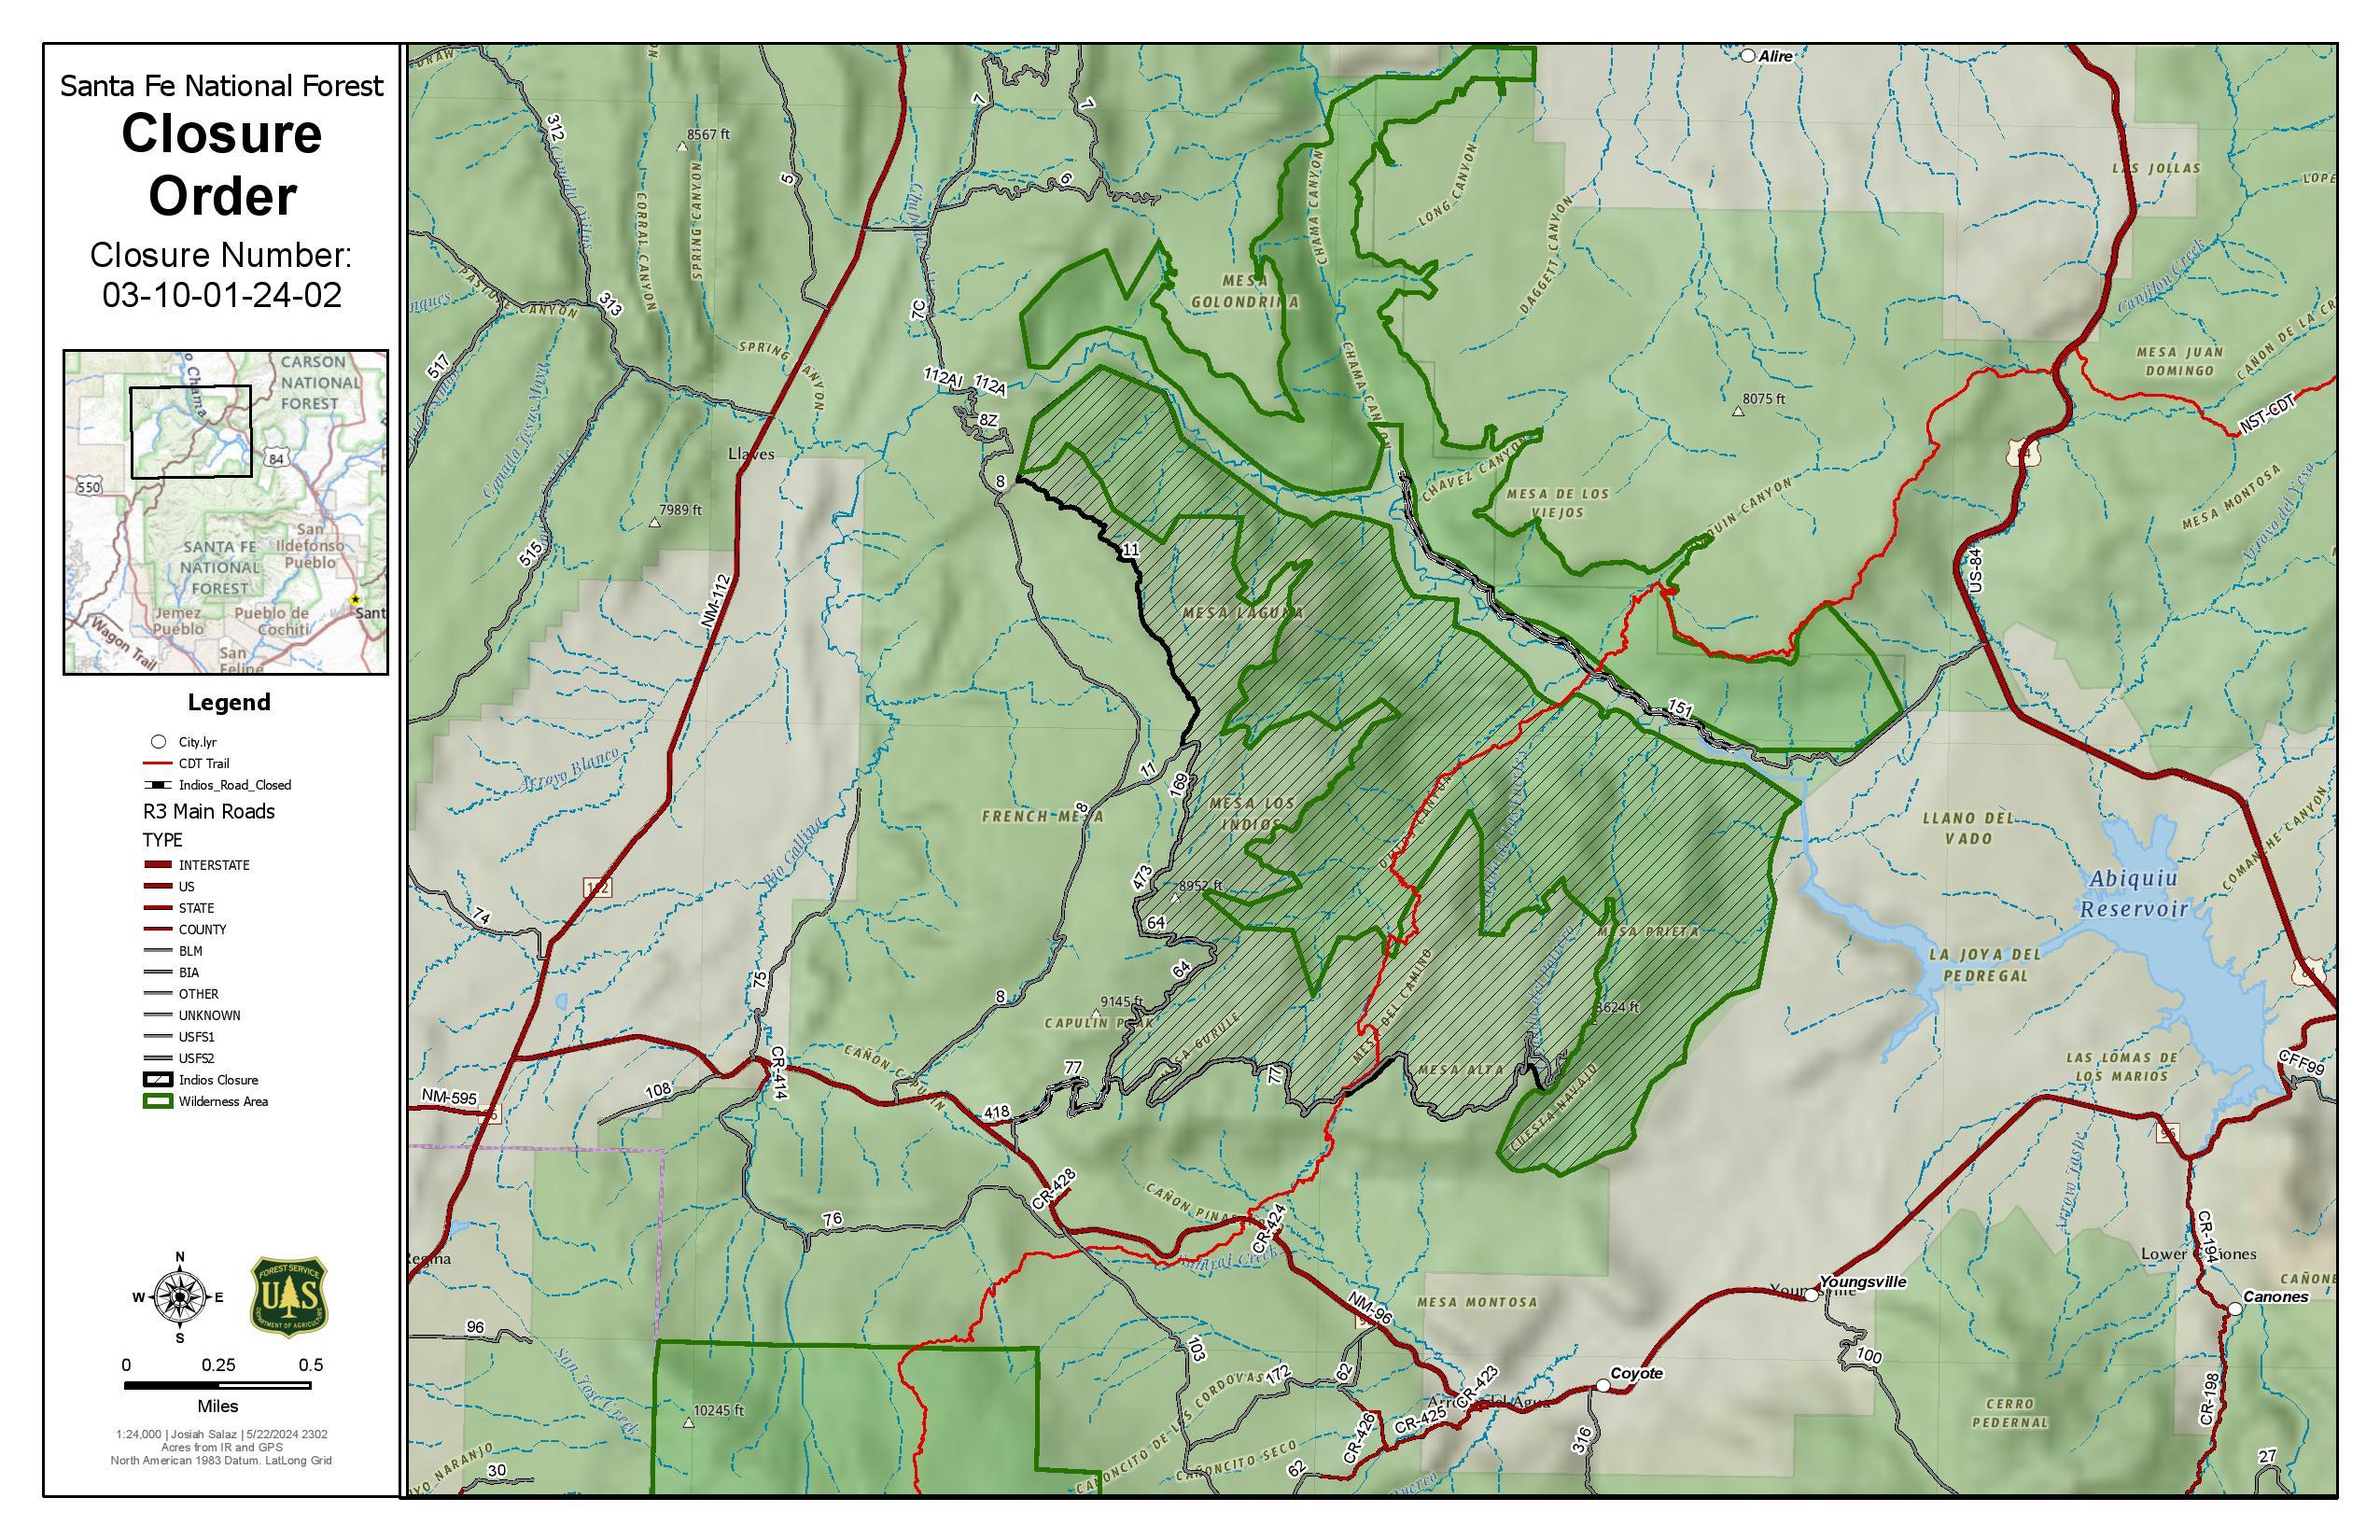 A map of the current Closure Order on the Santa Fe National Forest due to the Indios Fire.